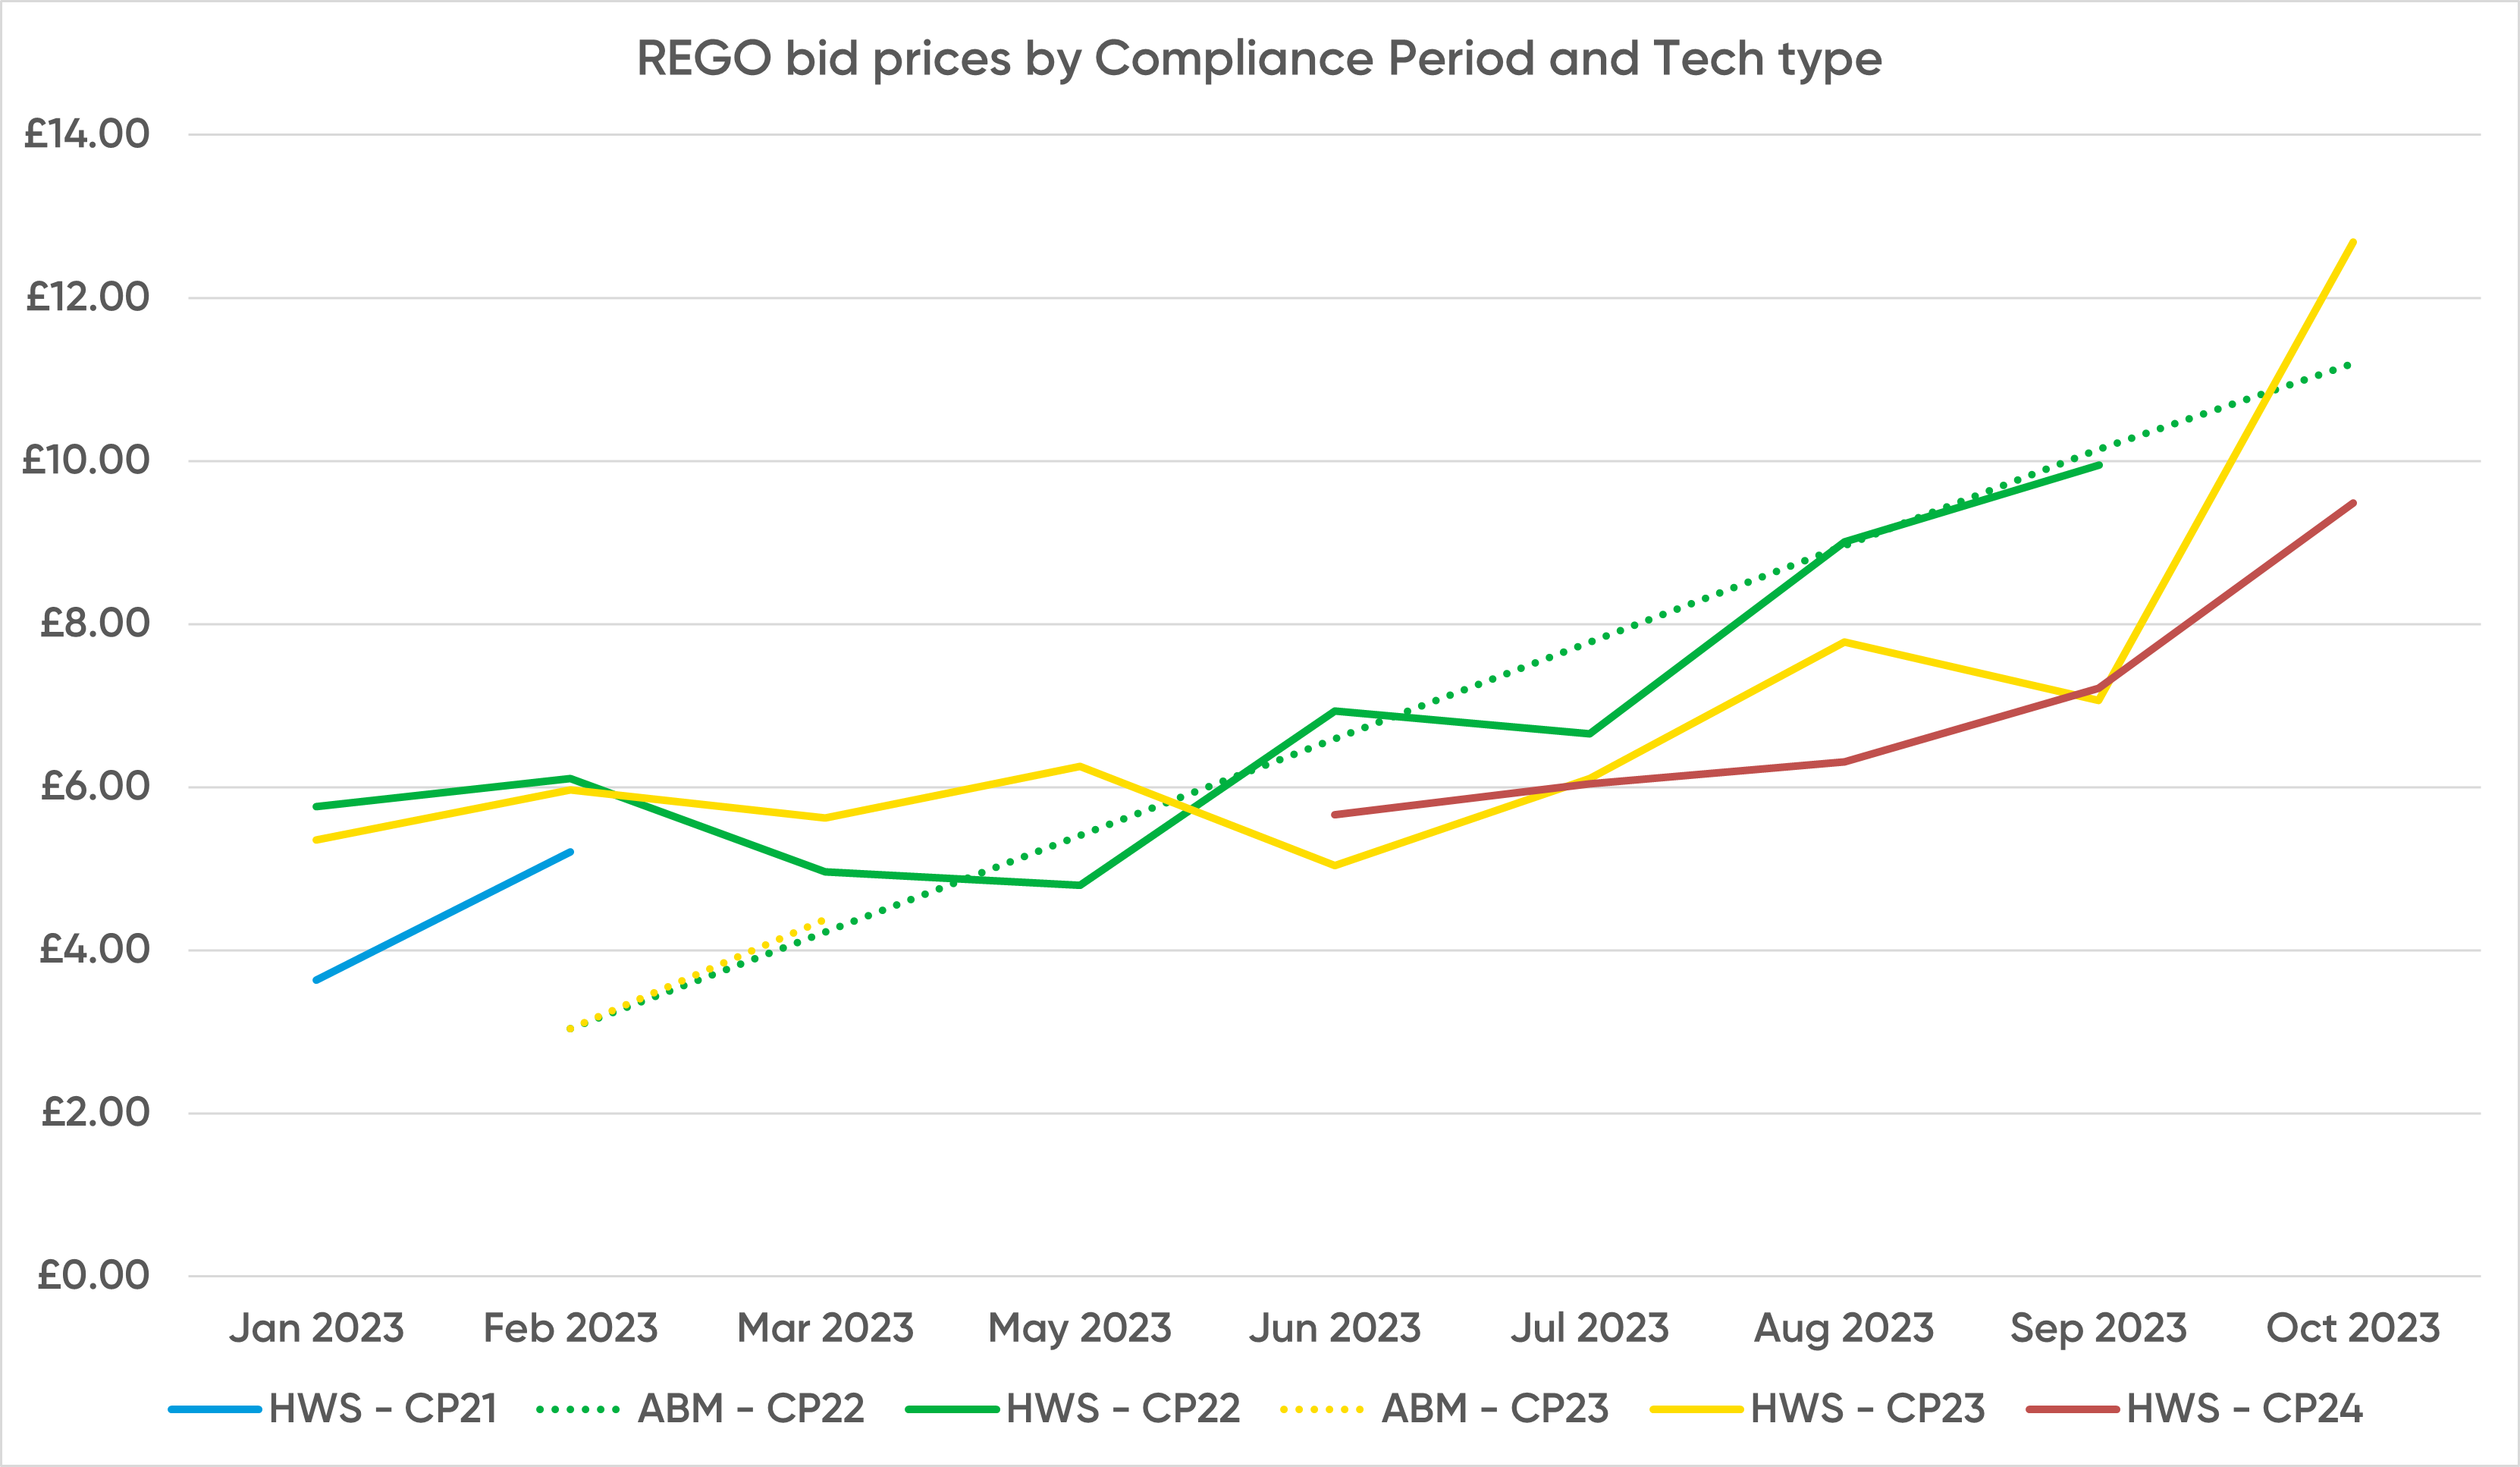 graph showing rego bid prices by compliance period and tech type 2023